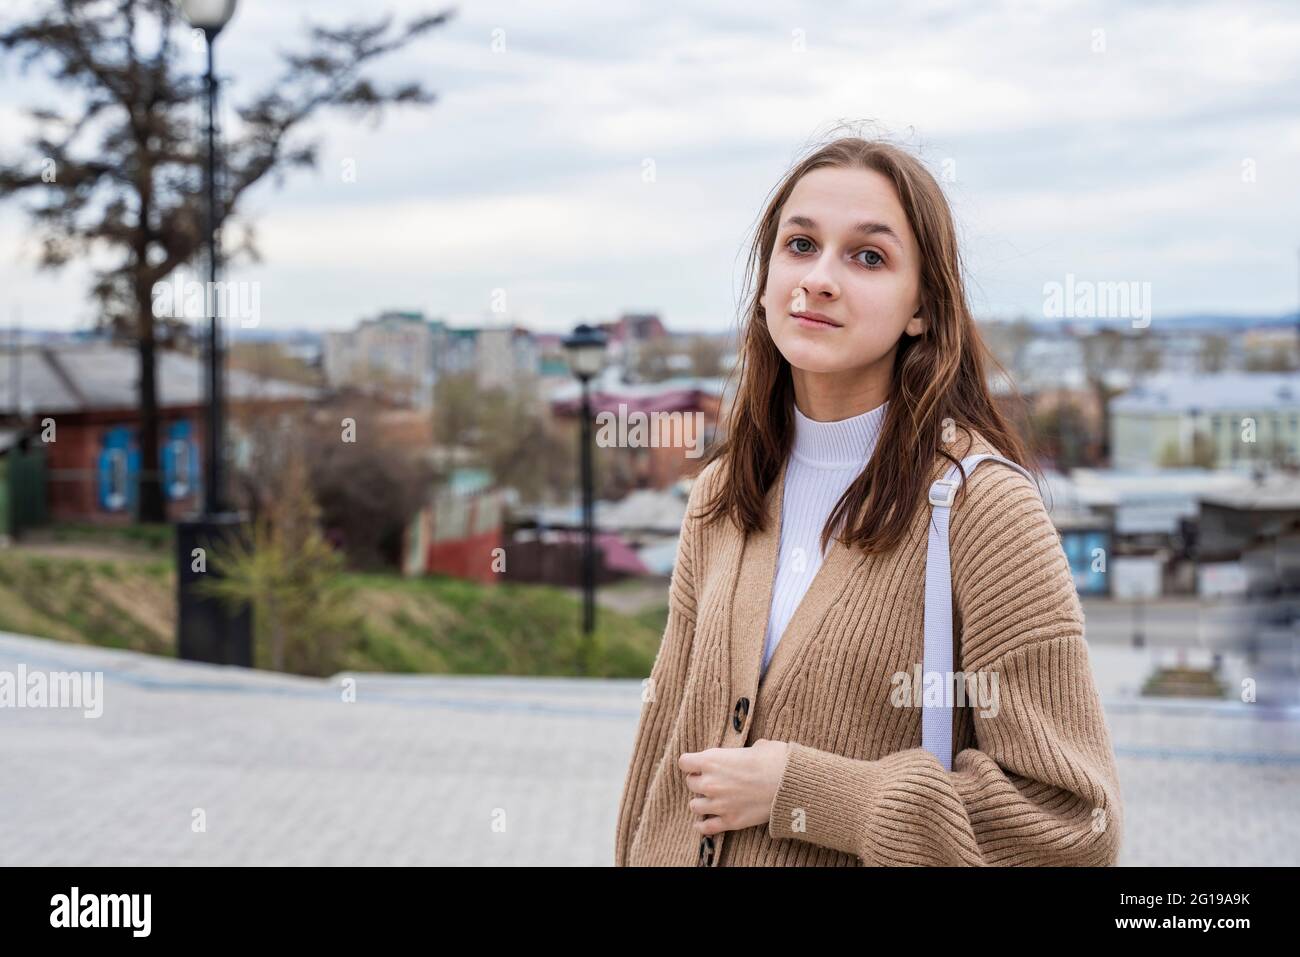 Portrait of a cute teenage girl on the street. Stock Photo